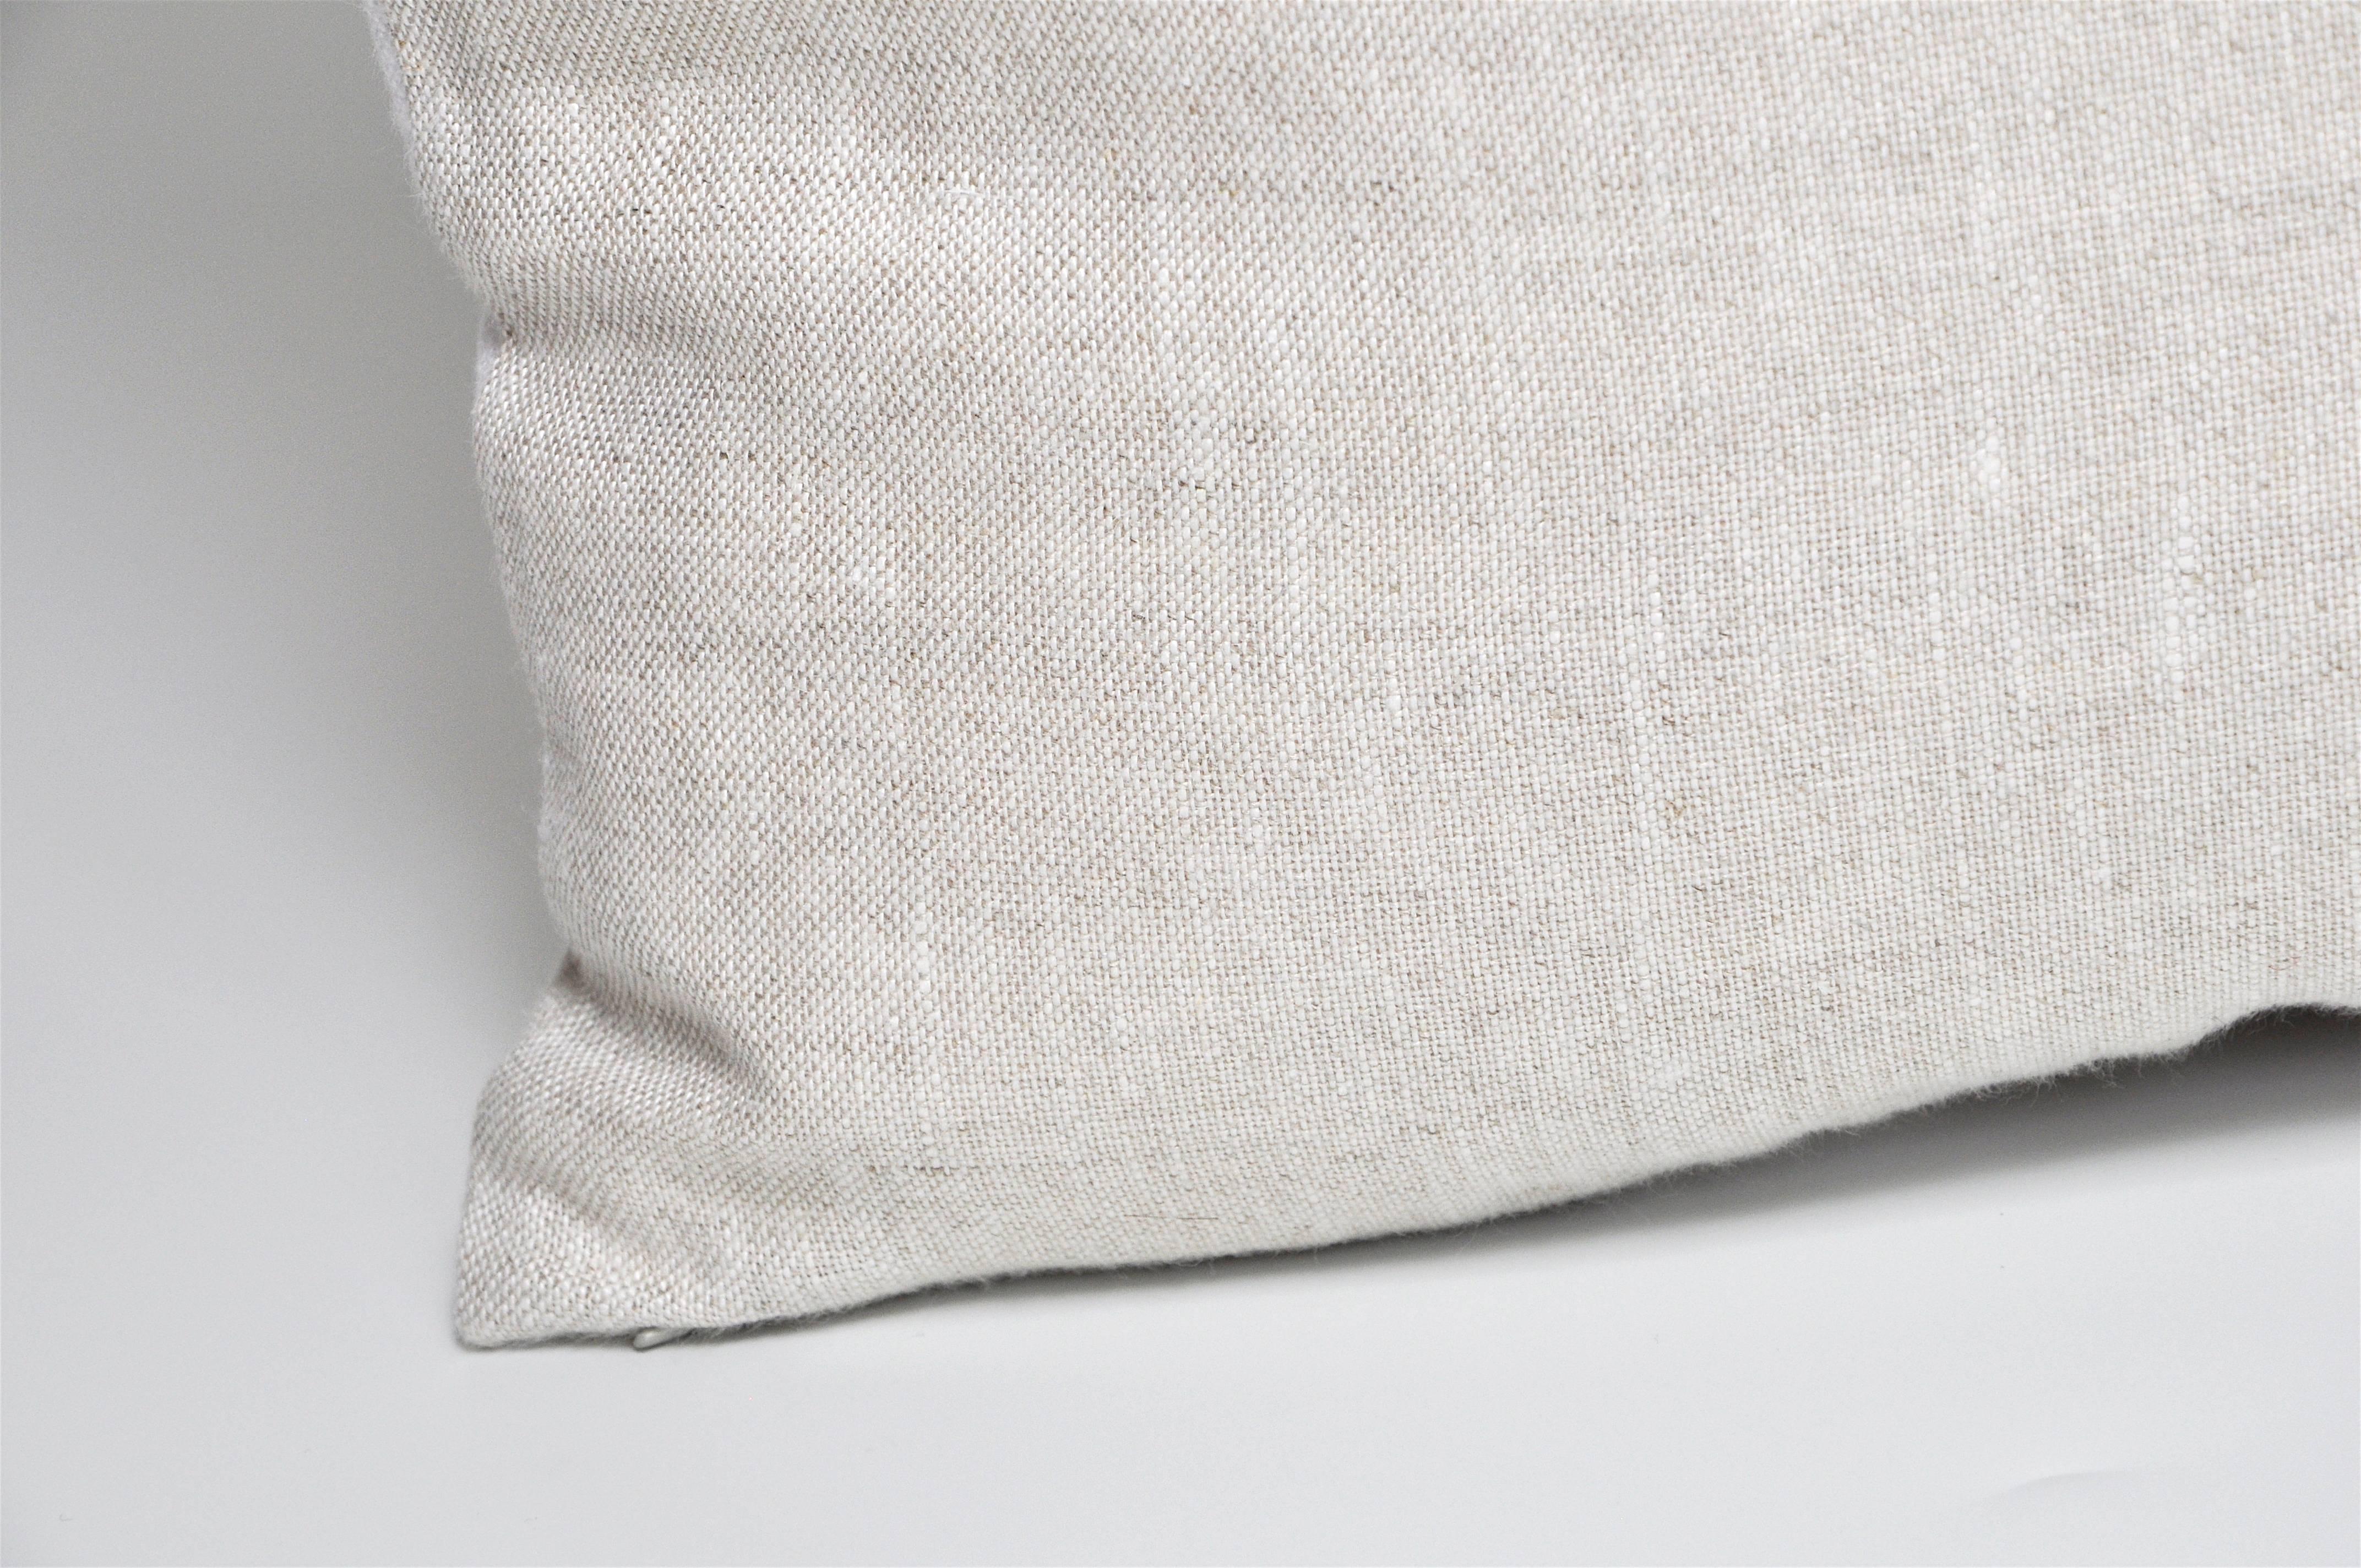 Hand-Crafted Large Irish Linen Geometric Cushion in Vintage White and Natural Oatmeal Pillow For Sale